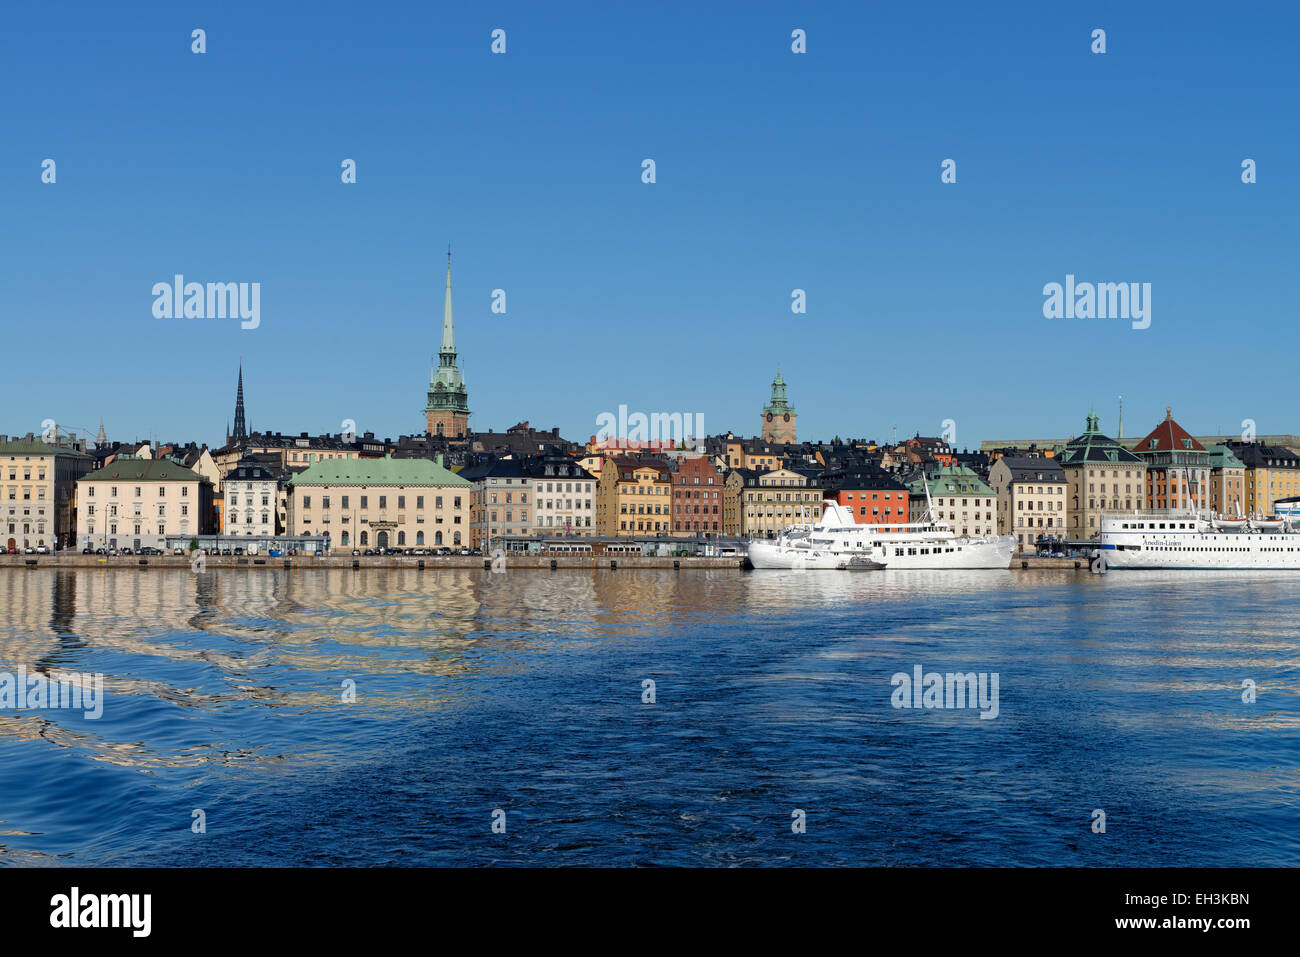 Houses on Skeppsbron, Gamla stan old town, from the ferry, Stockholm, Sweden Stock Photo